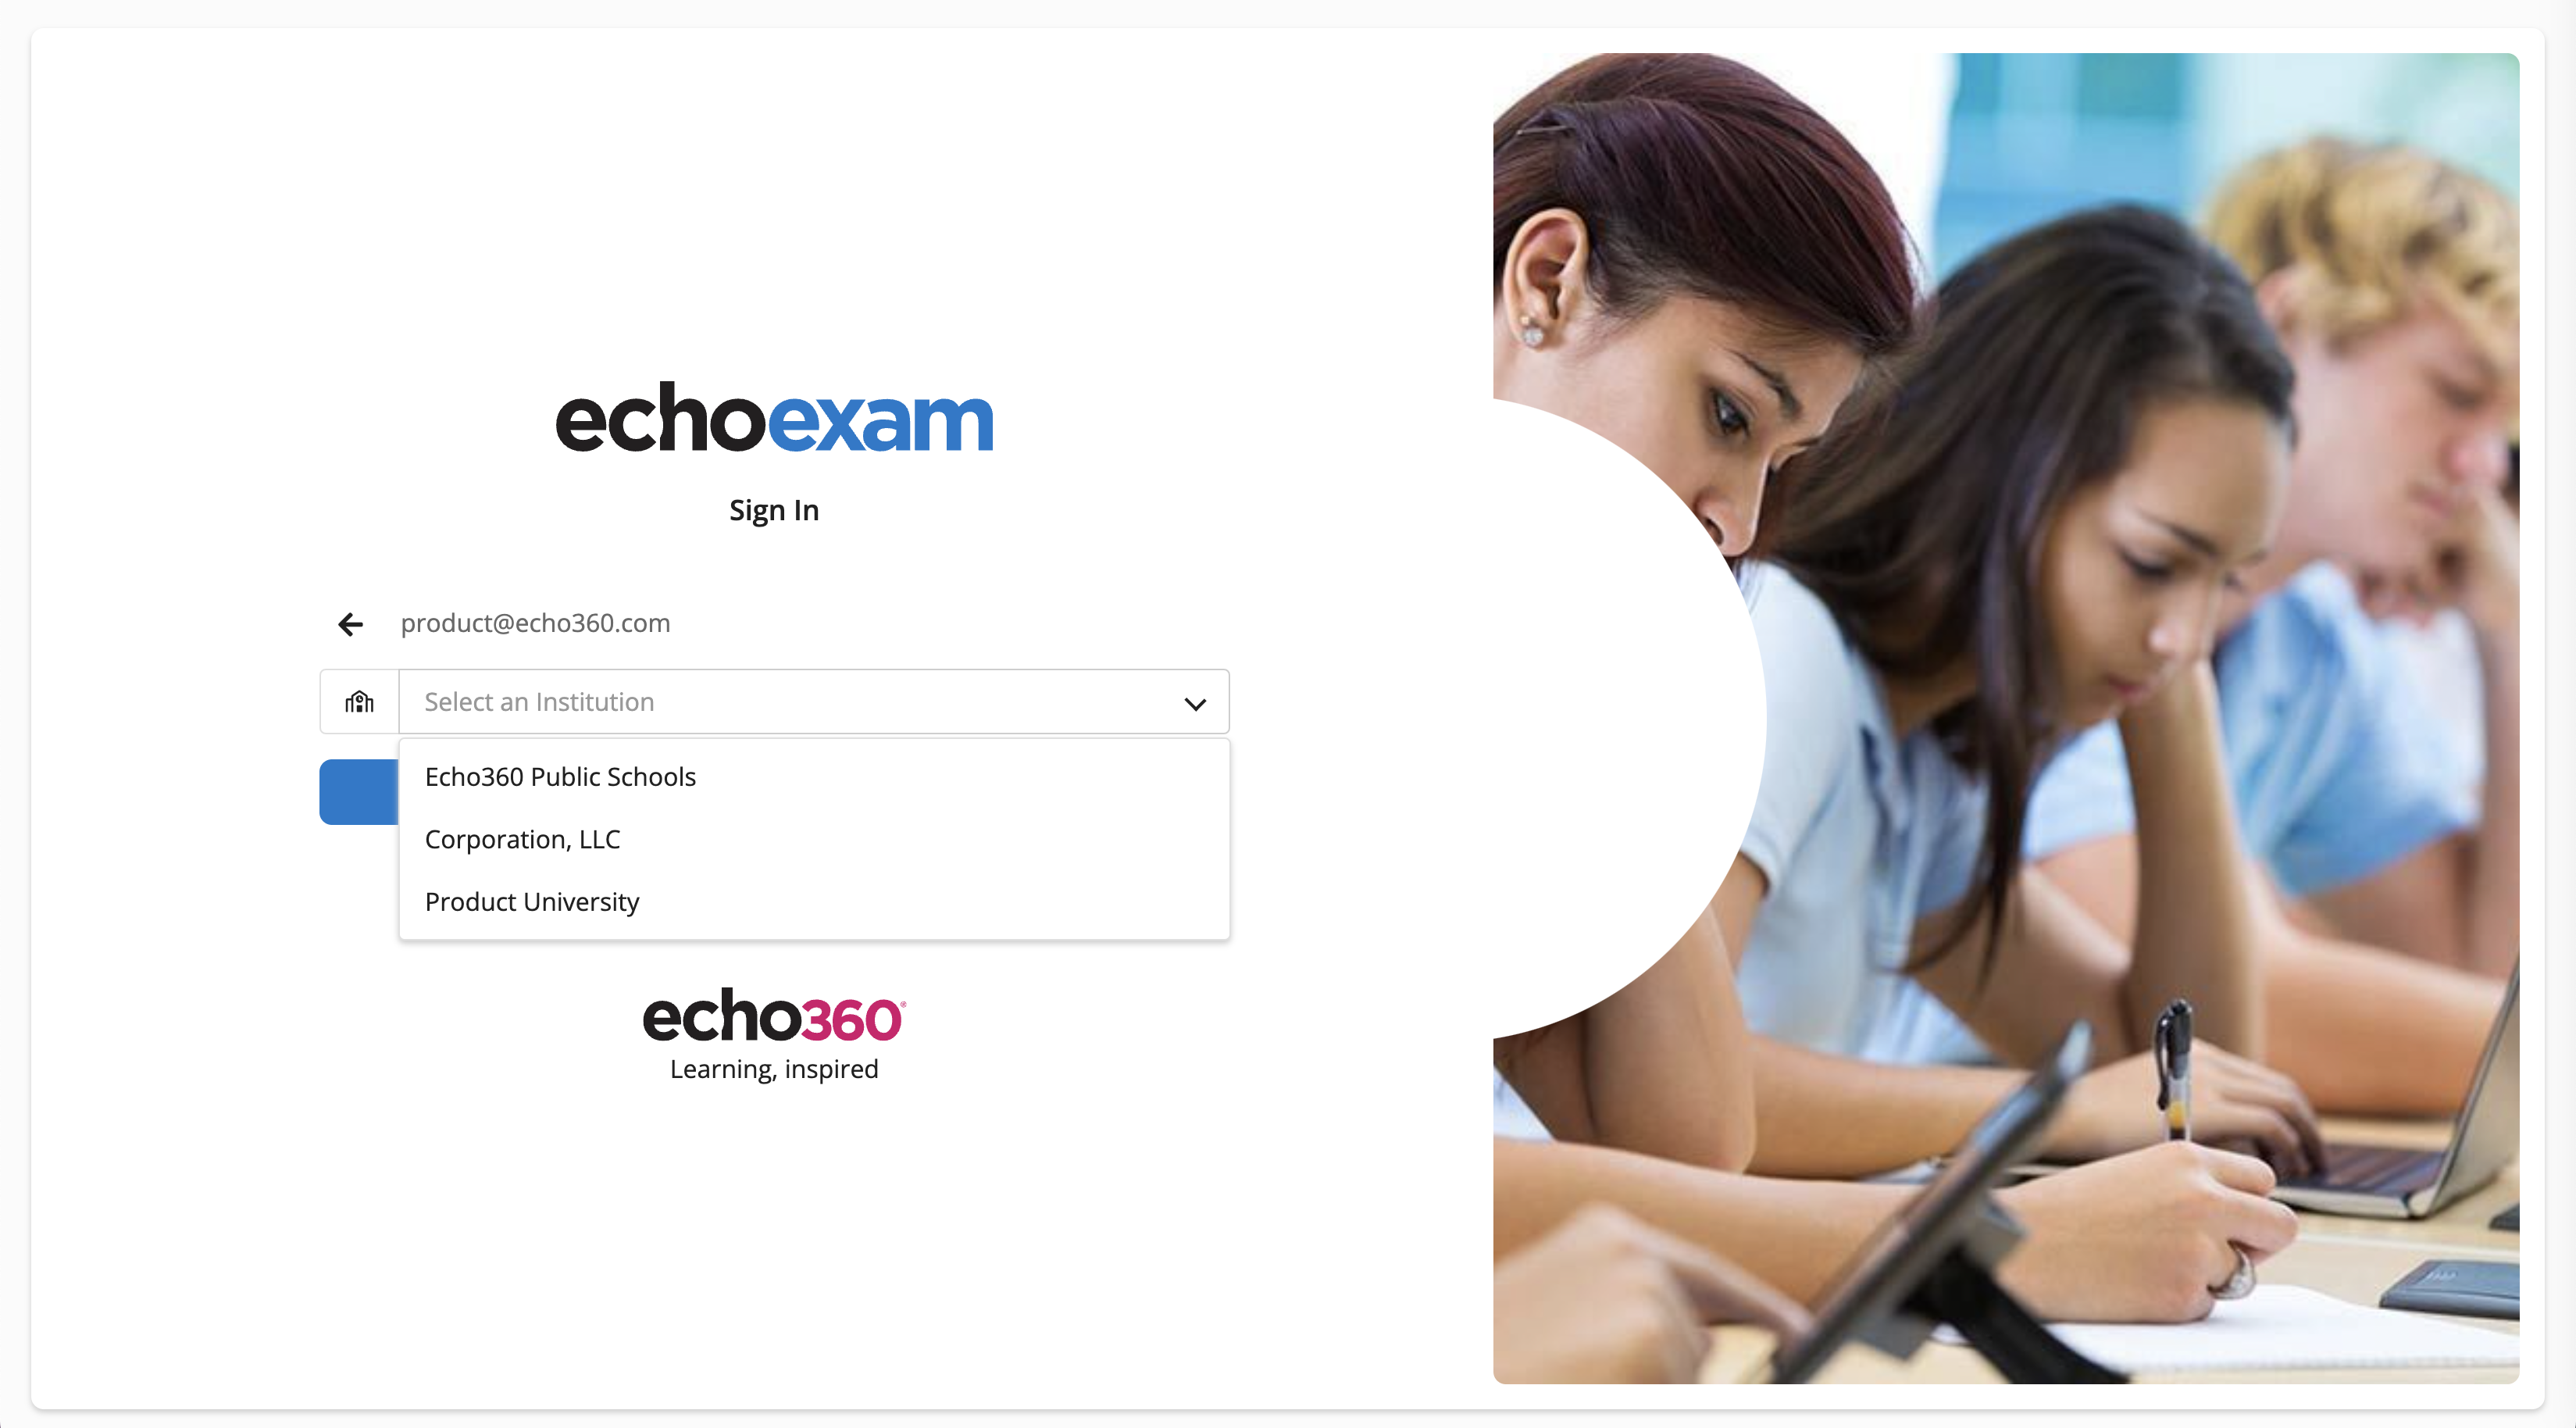 The EchoExam log-in screen with a drop-down showing multiple organizations the user has access to to select from